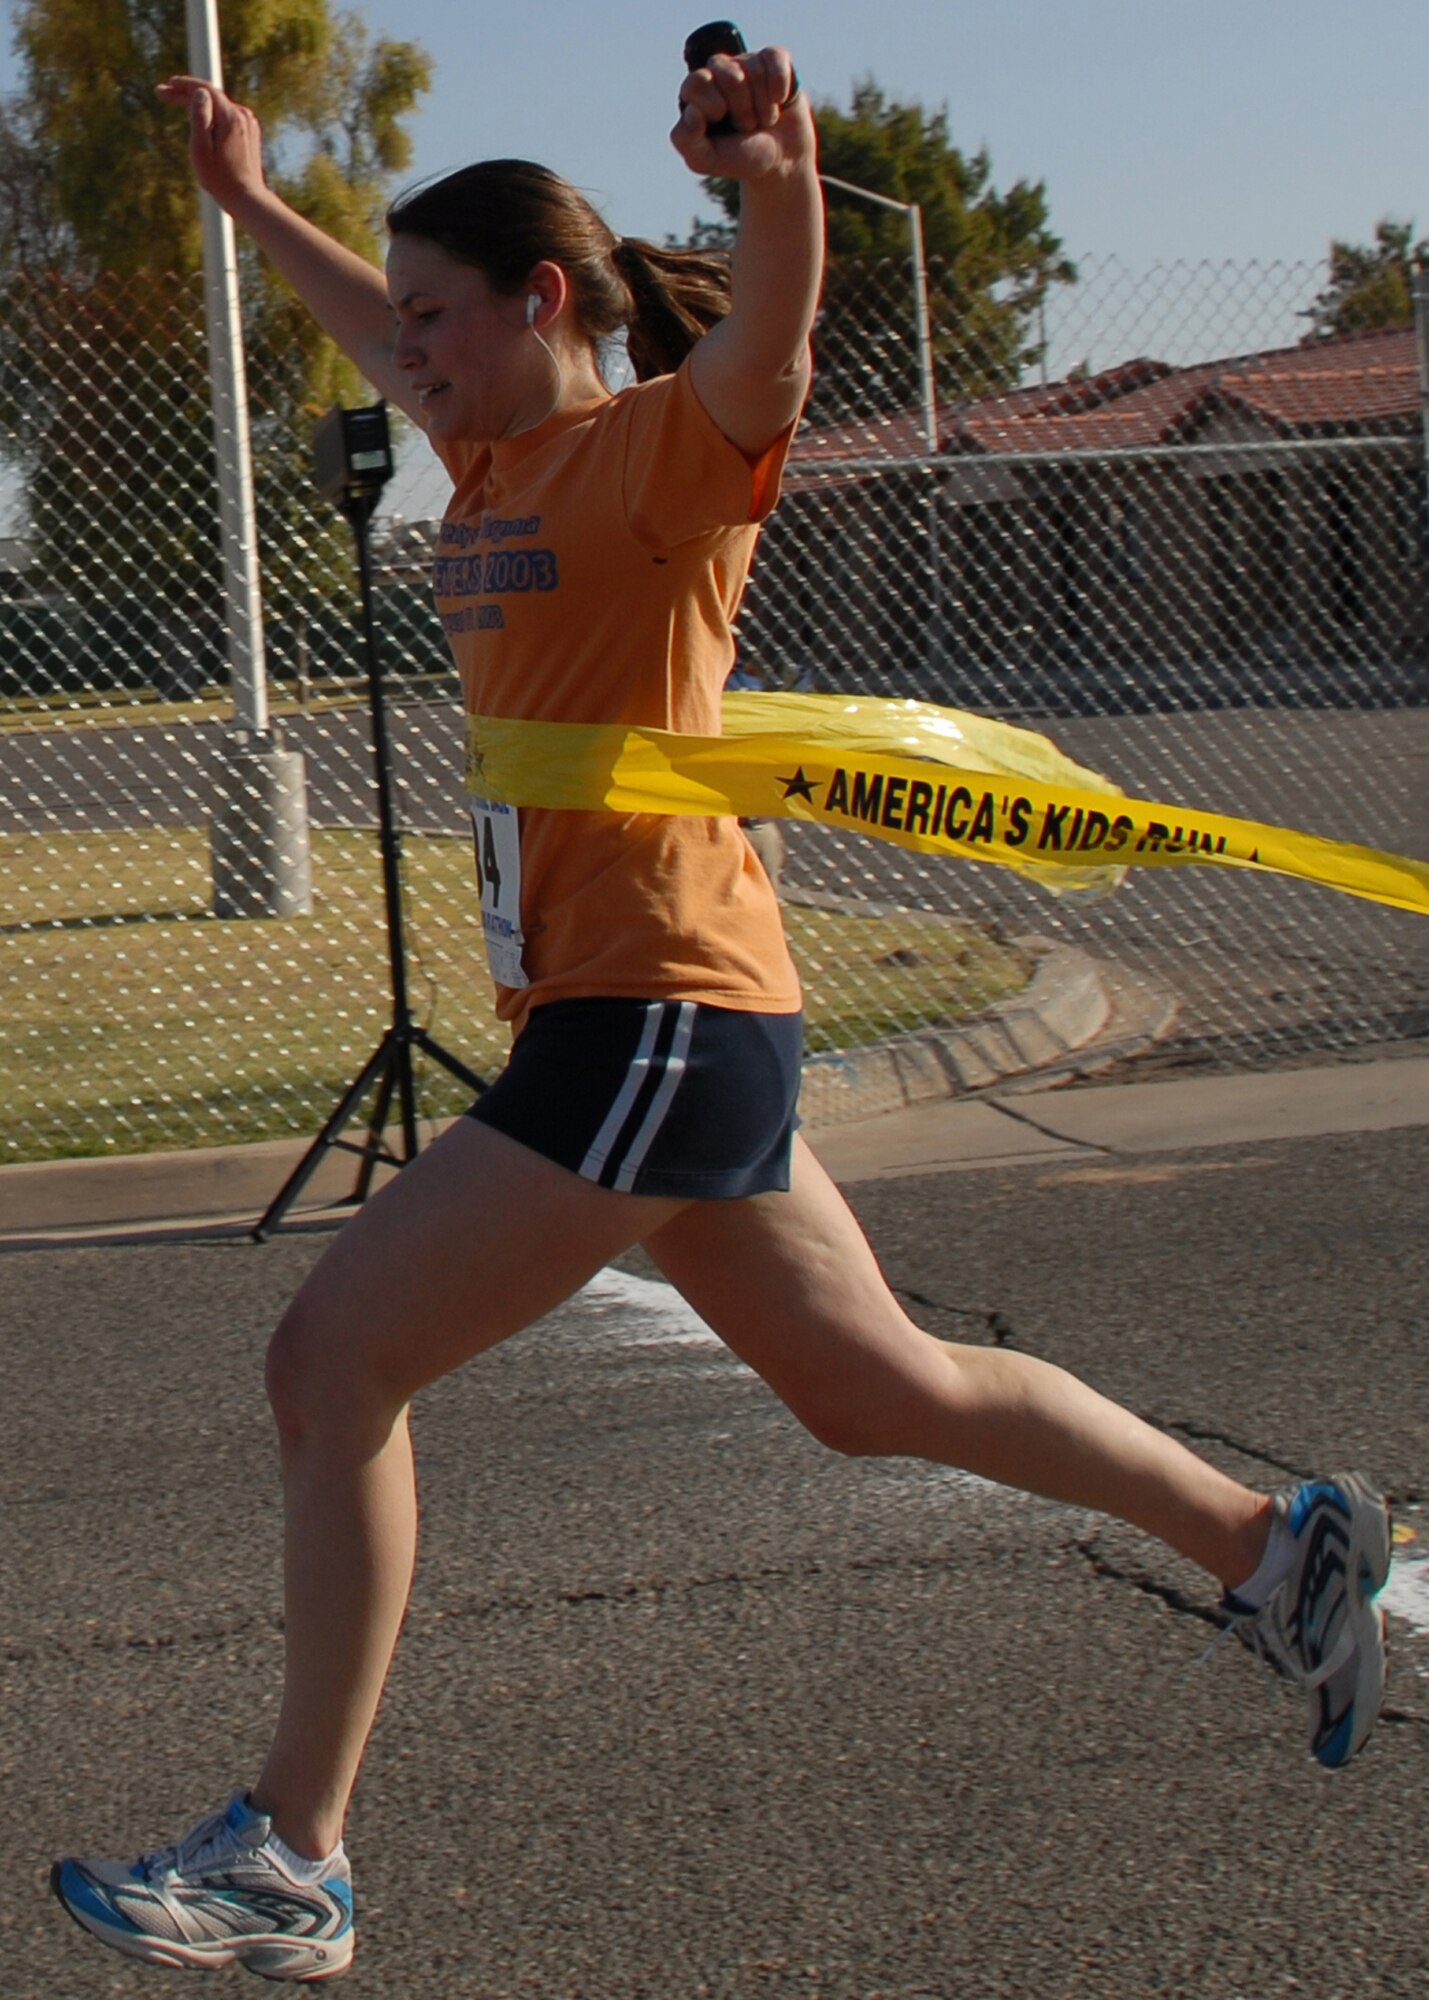 Second Lieutenant Sarah Hall, deputy chief of intel operations with the 56th Operations Support Squadron, crosses the finish line after 1 hour 58 minutes, becoming the first woman to finish the 13.2 mile run held at the Base Fitness Center, May 3. Lt. Hall is her squadrons physical training leader and also runs 4 to 5 miles at least 3 times a week. The half marathon consisted more than 50 Airmen, retirees, and children from Luke Air Force Base. (U.S. Air Force photo/Airman 1st Class Tracie Forte)